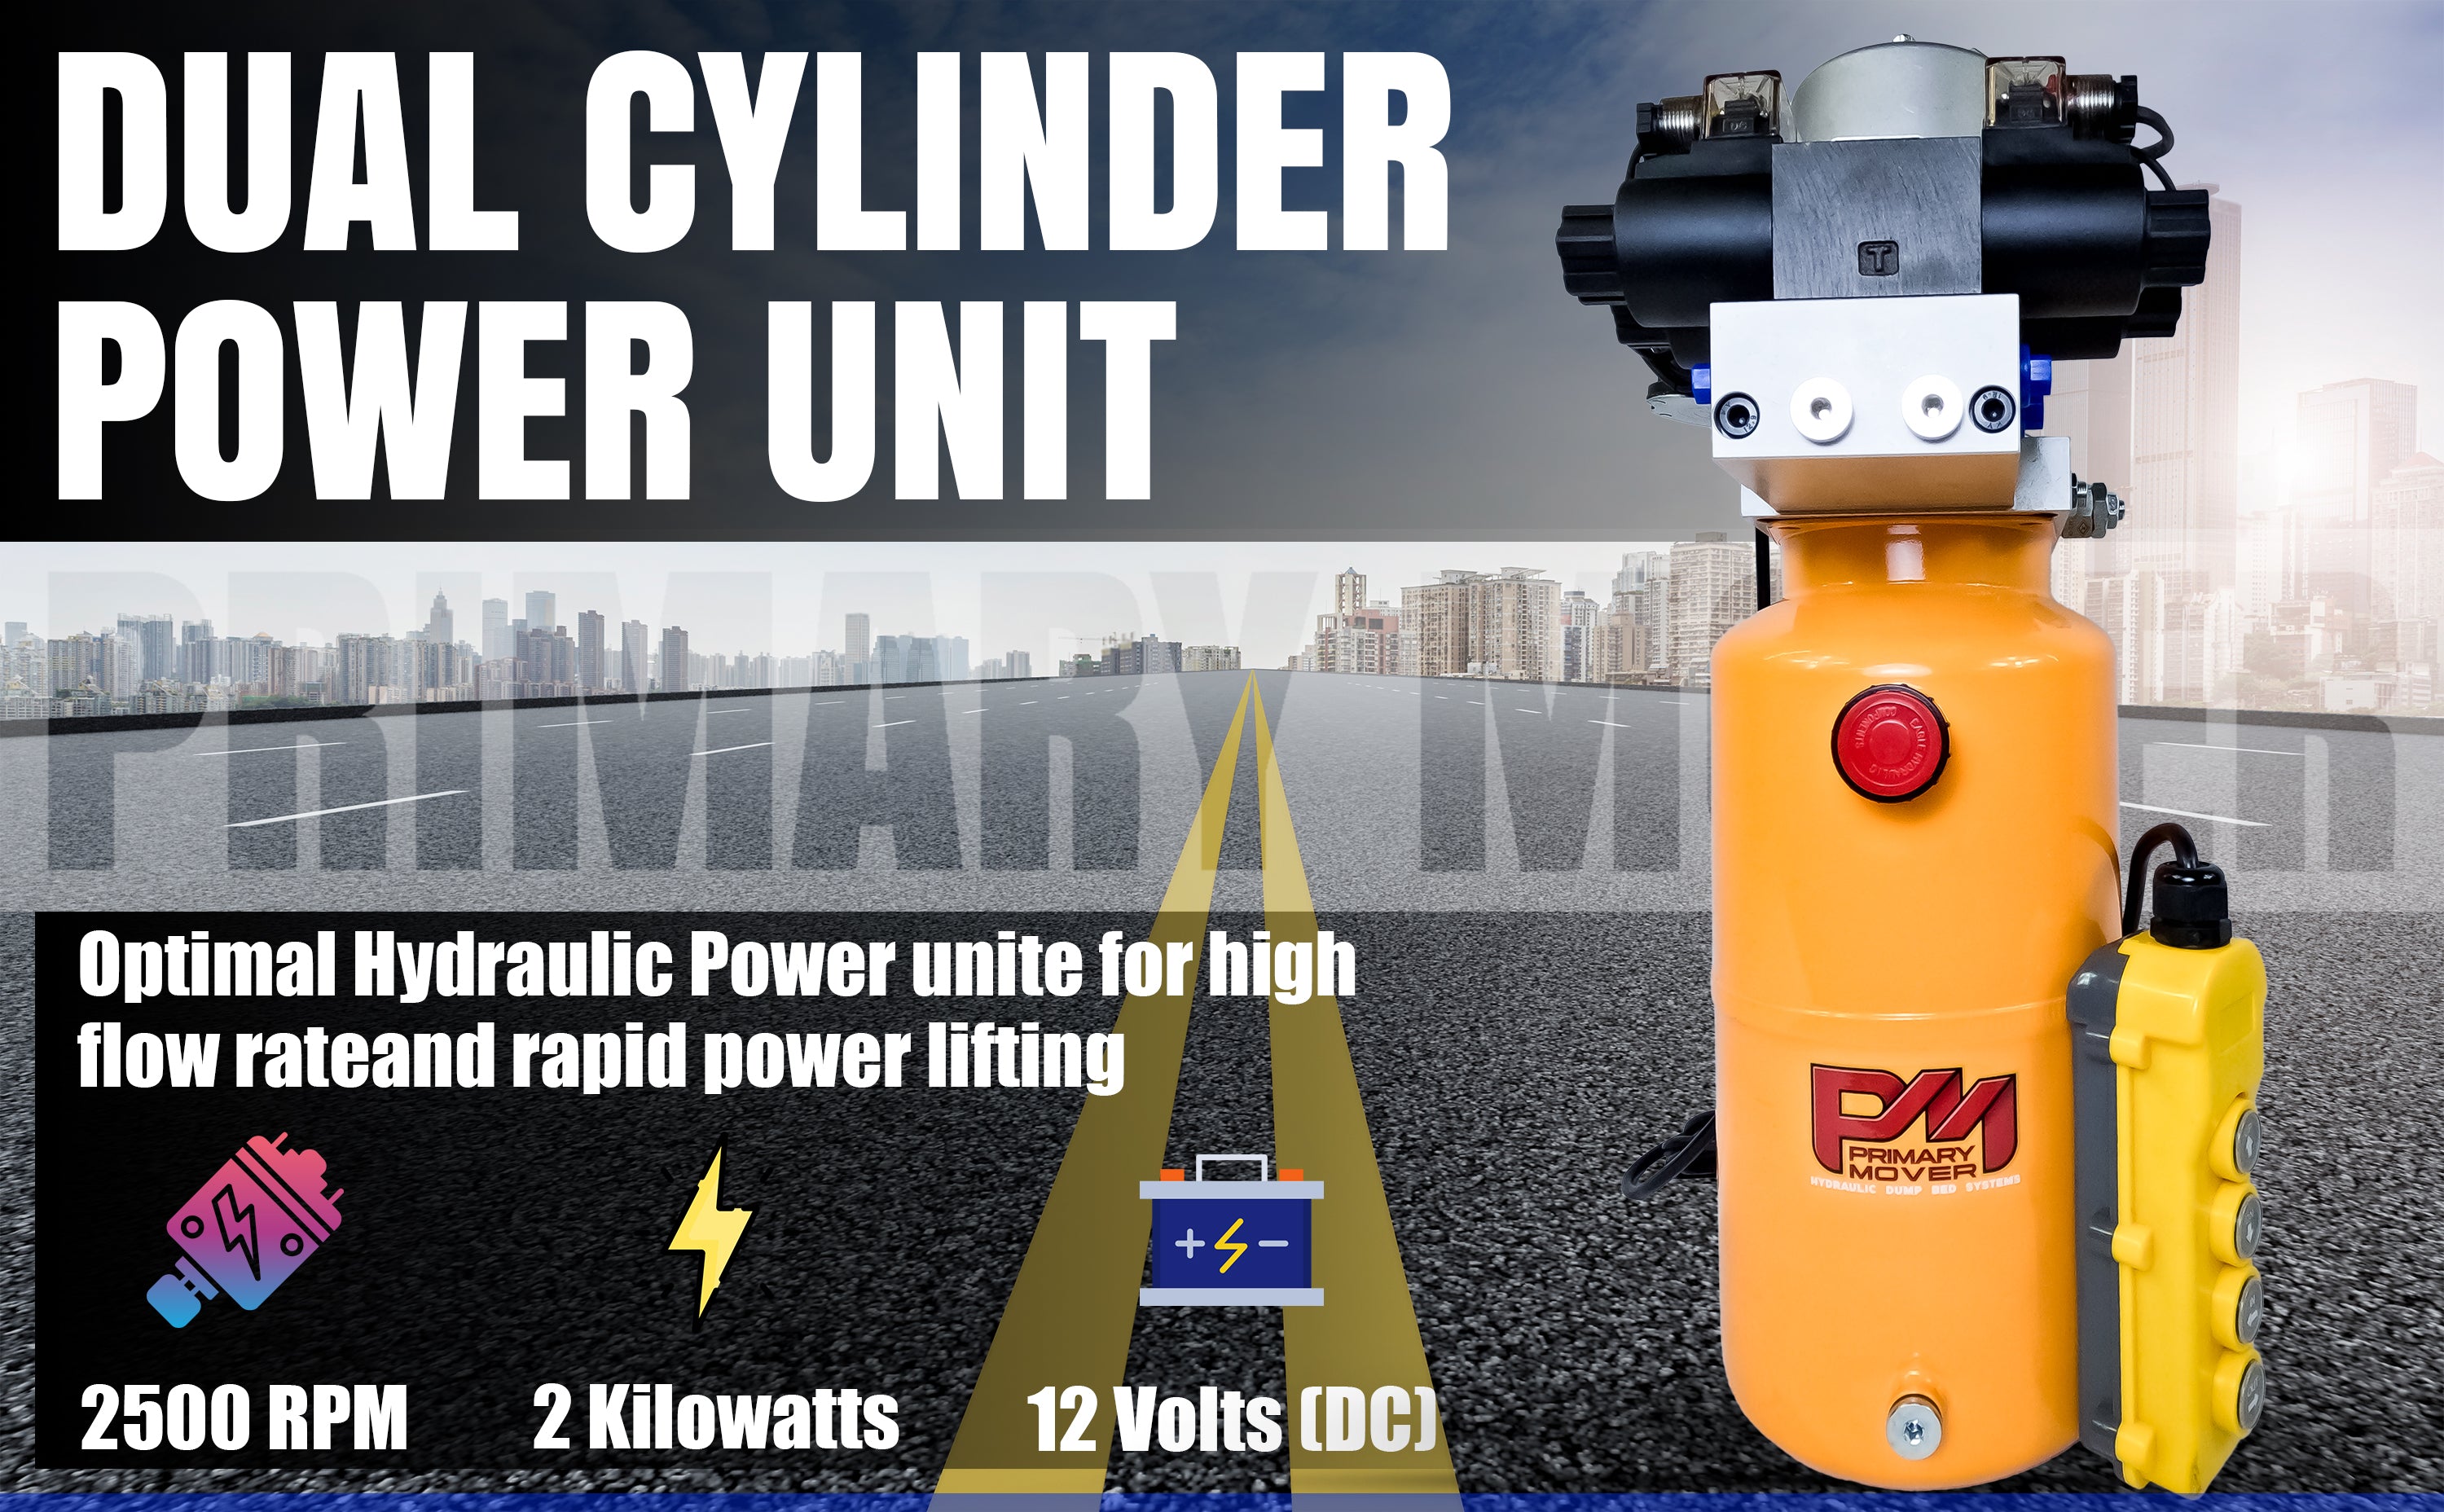 Compact and powerful Dual Double-Acting Hydraulic Power Unit from Primary Mover, ideal for dump trailers and trucks, enabling four hydraulic actions simultaneously. Used for any truck or trailer application. 1/2 ton truck dump bed kit.